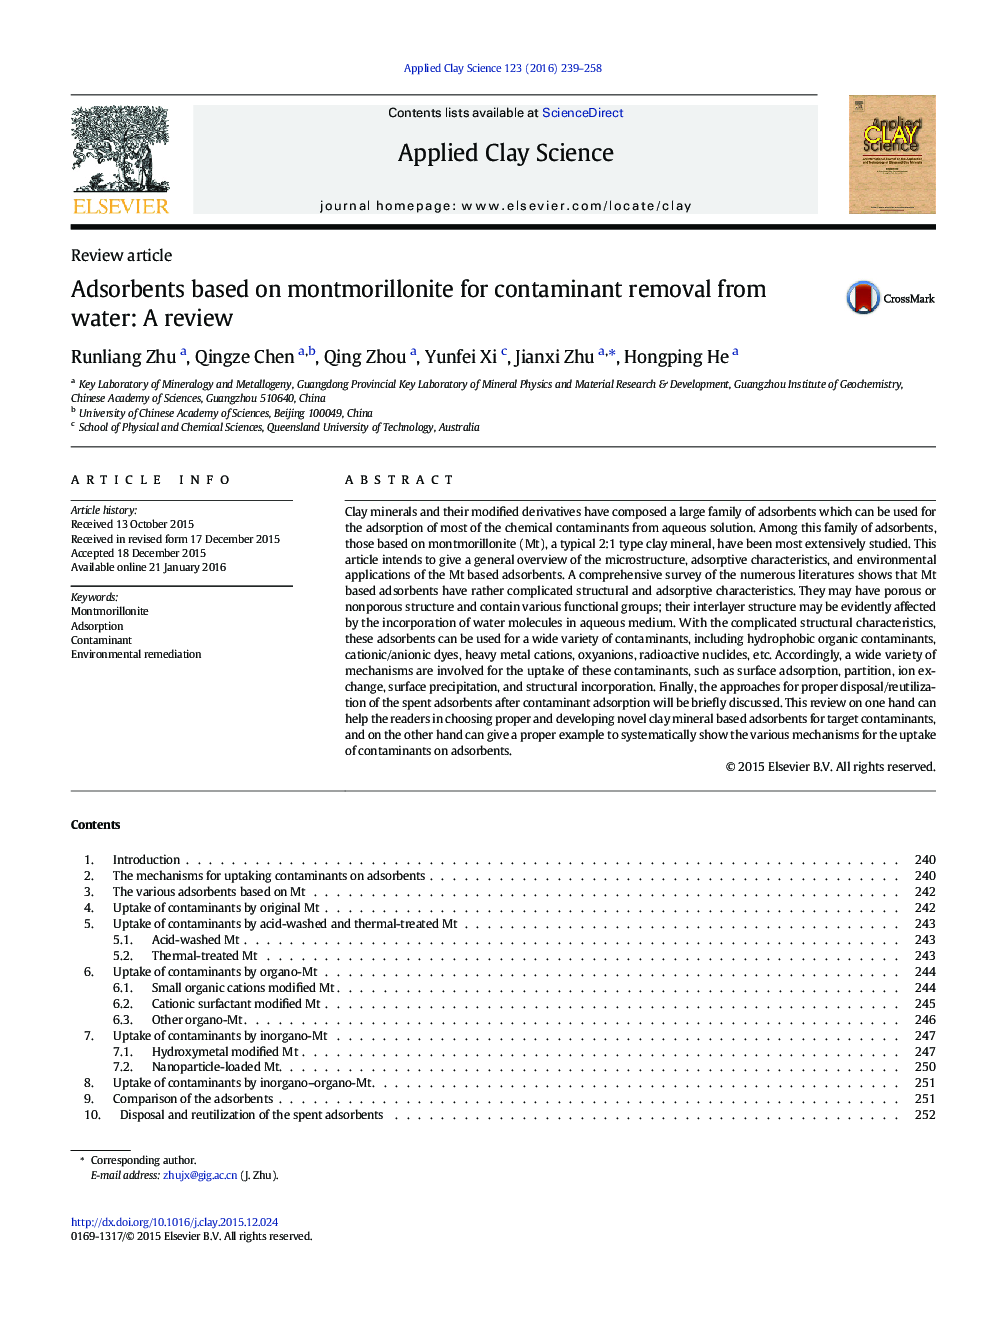 Adsorbents based on montmorillonite for contaminant removal from water: A review